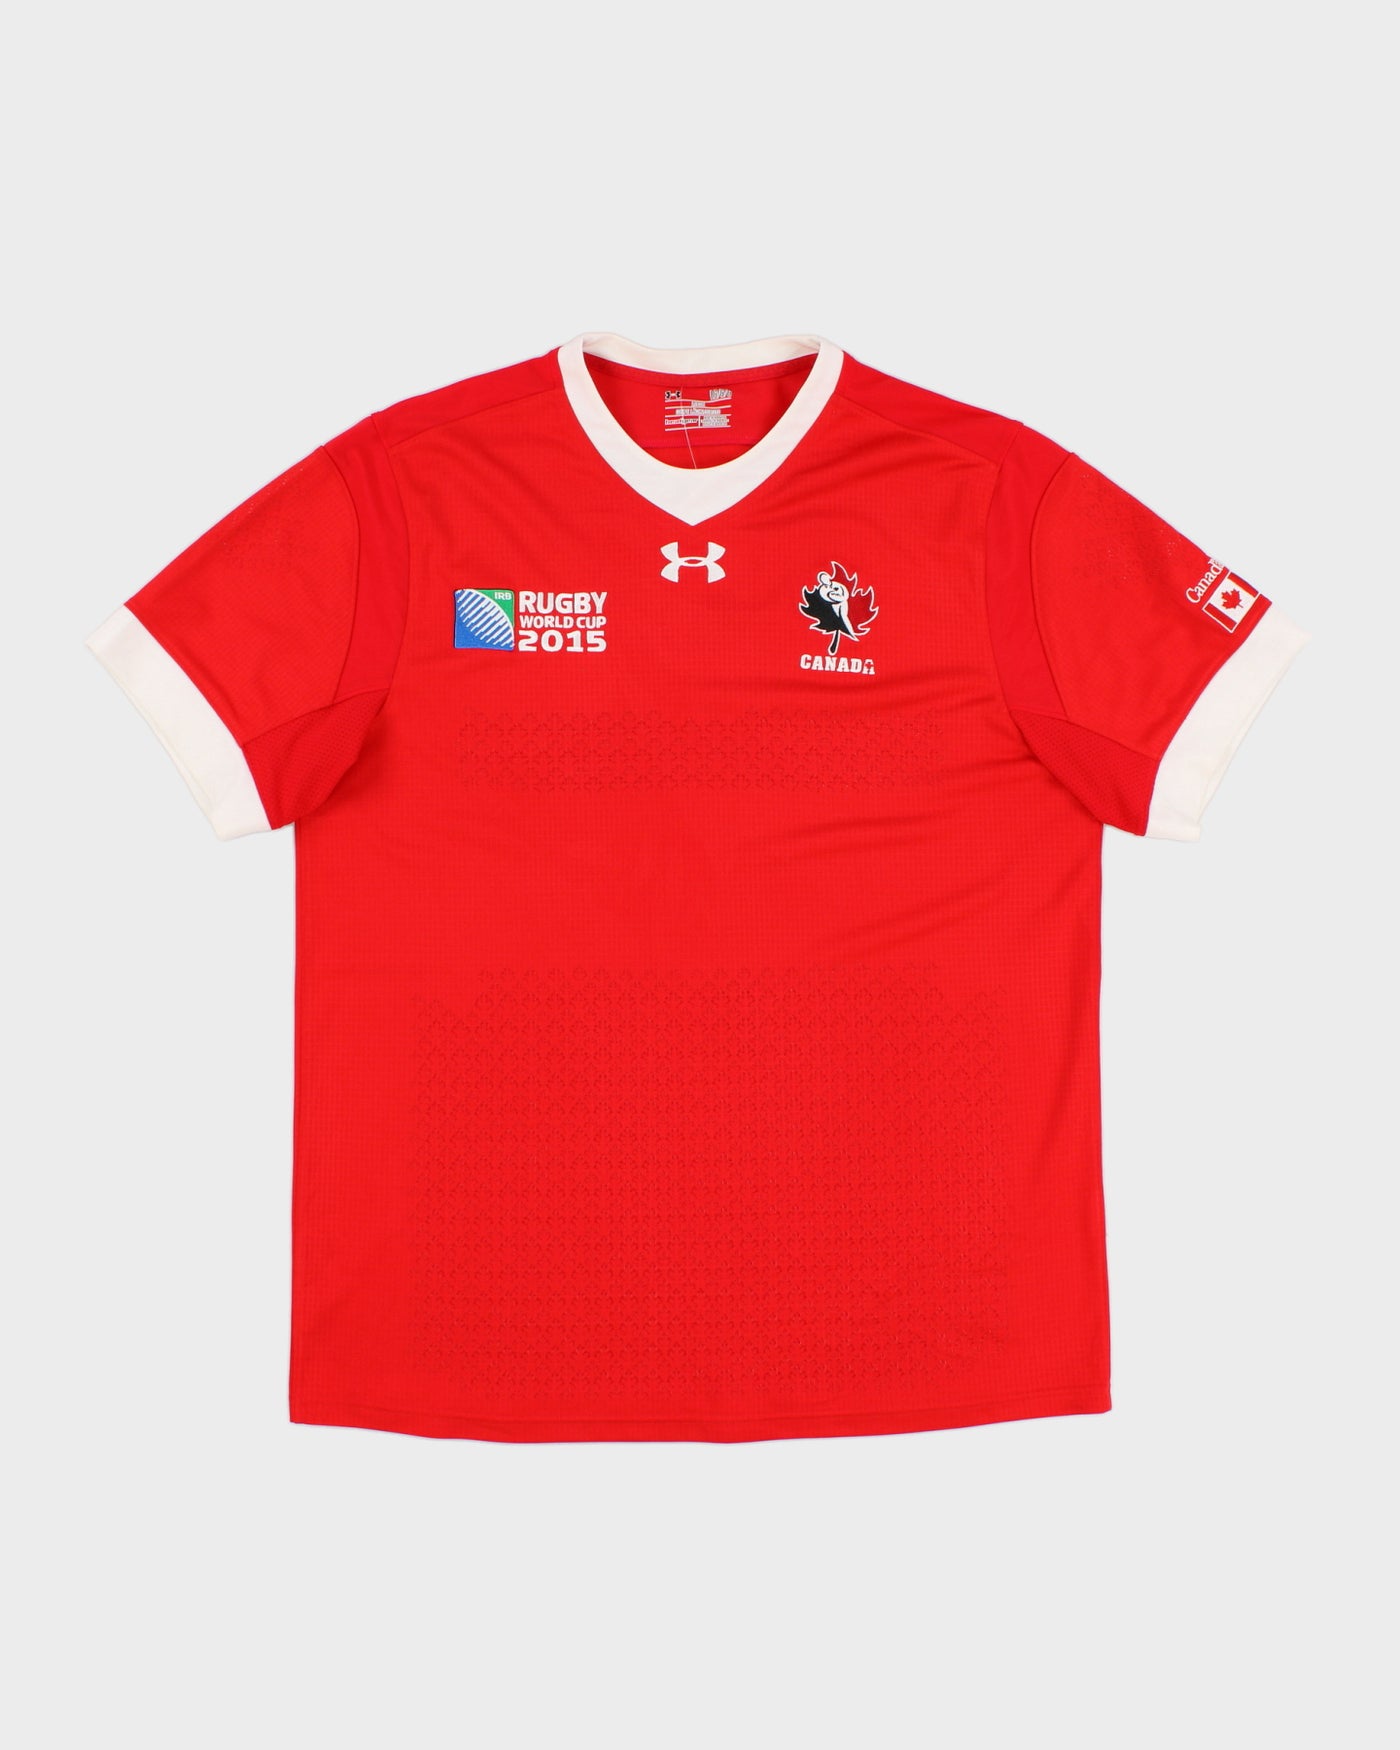 Under Armour Canada World Cup 2015 Rugby Shirt - L